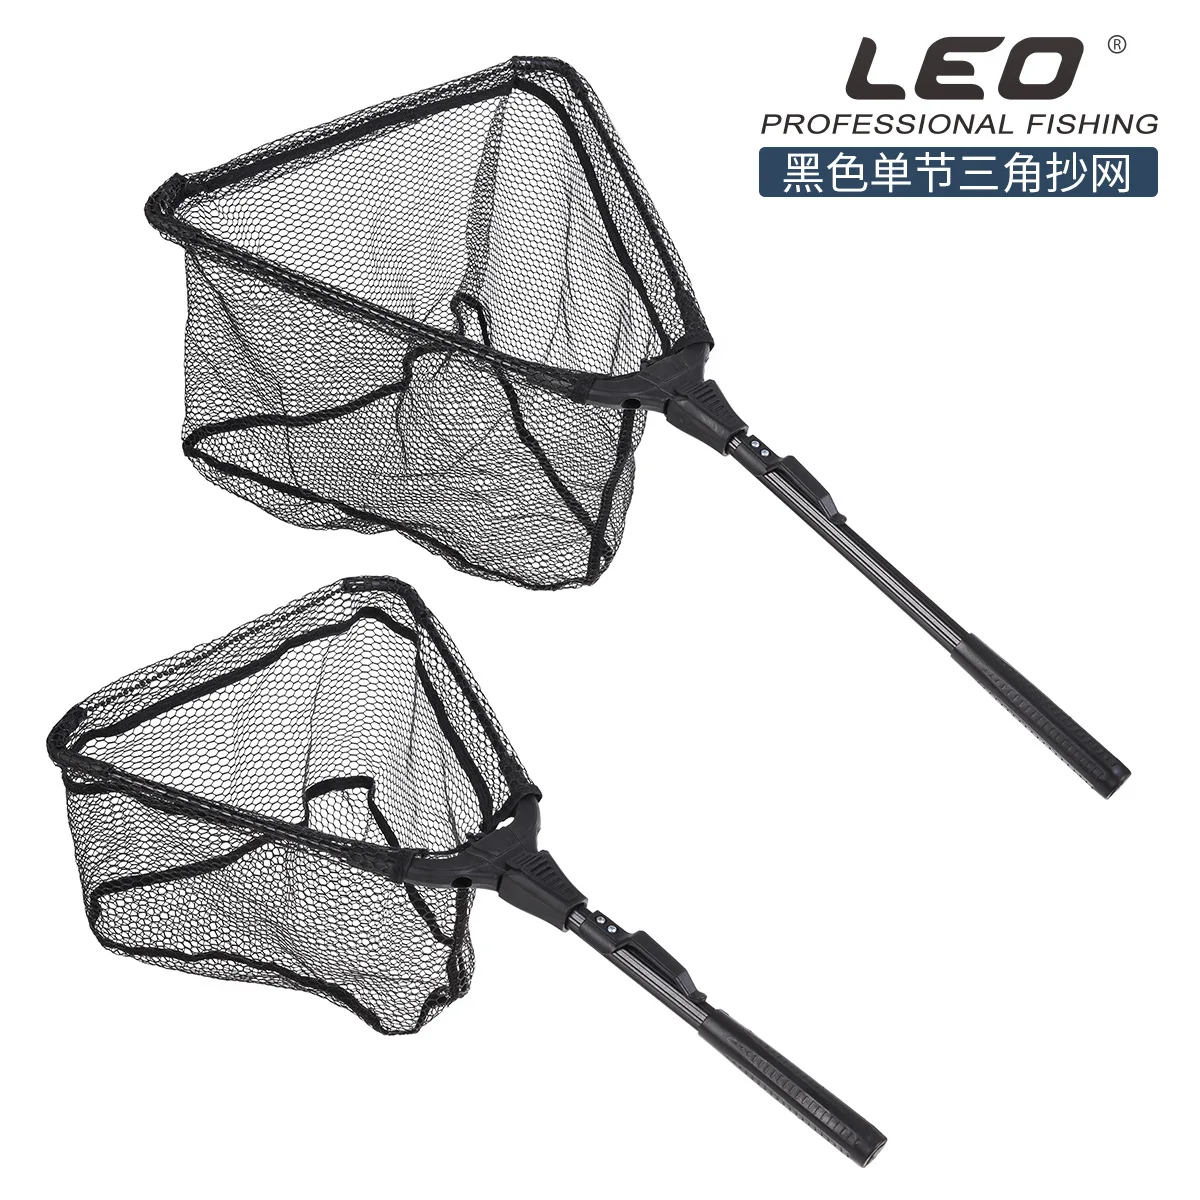 

Aluminum Alloy Fishing Net Telescoping Foldable Landing Net Retractable Pole for Carp Fishing Tackle Catching Releasing